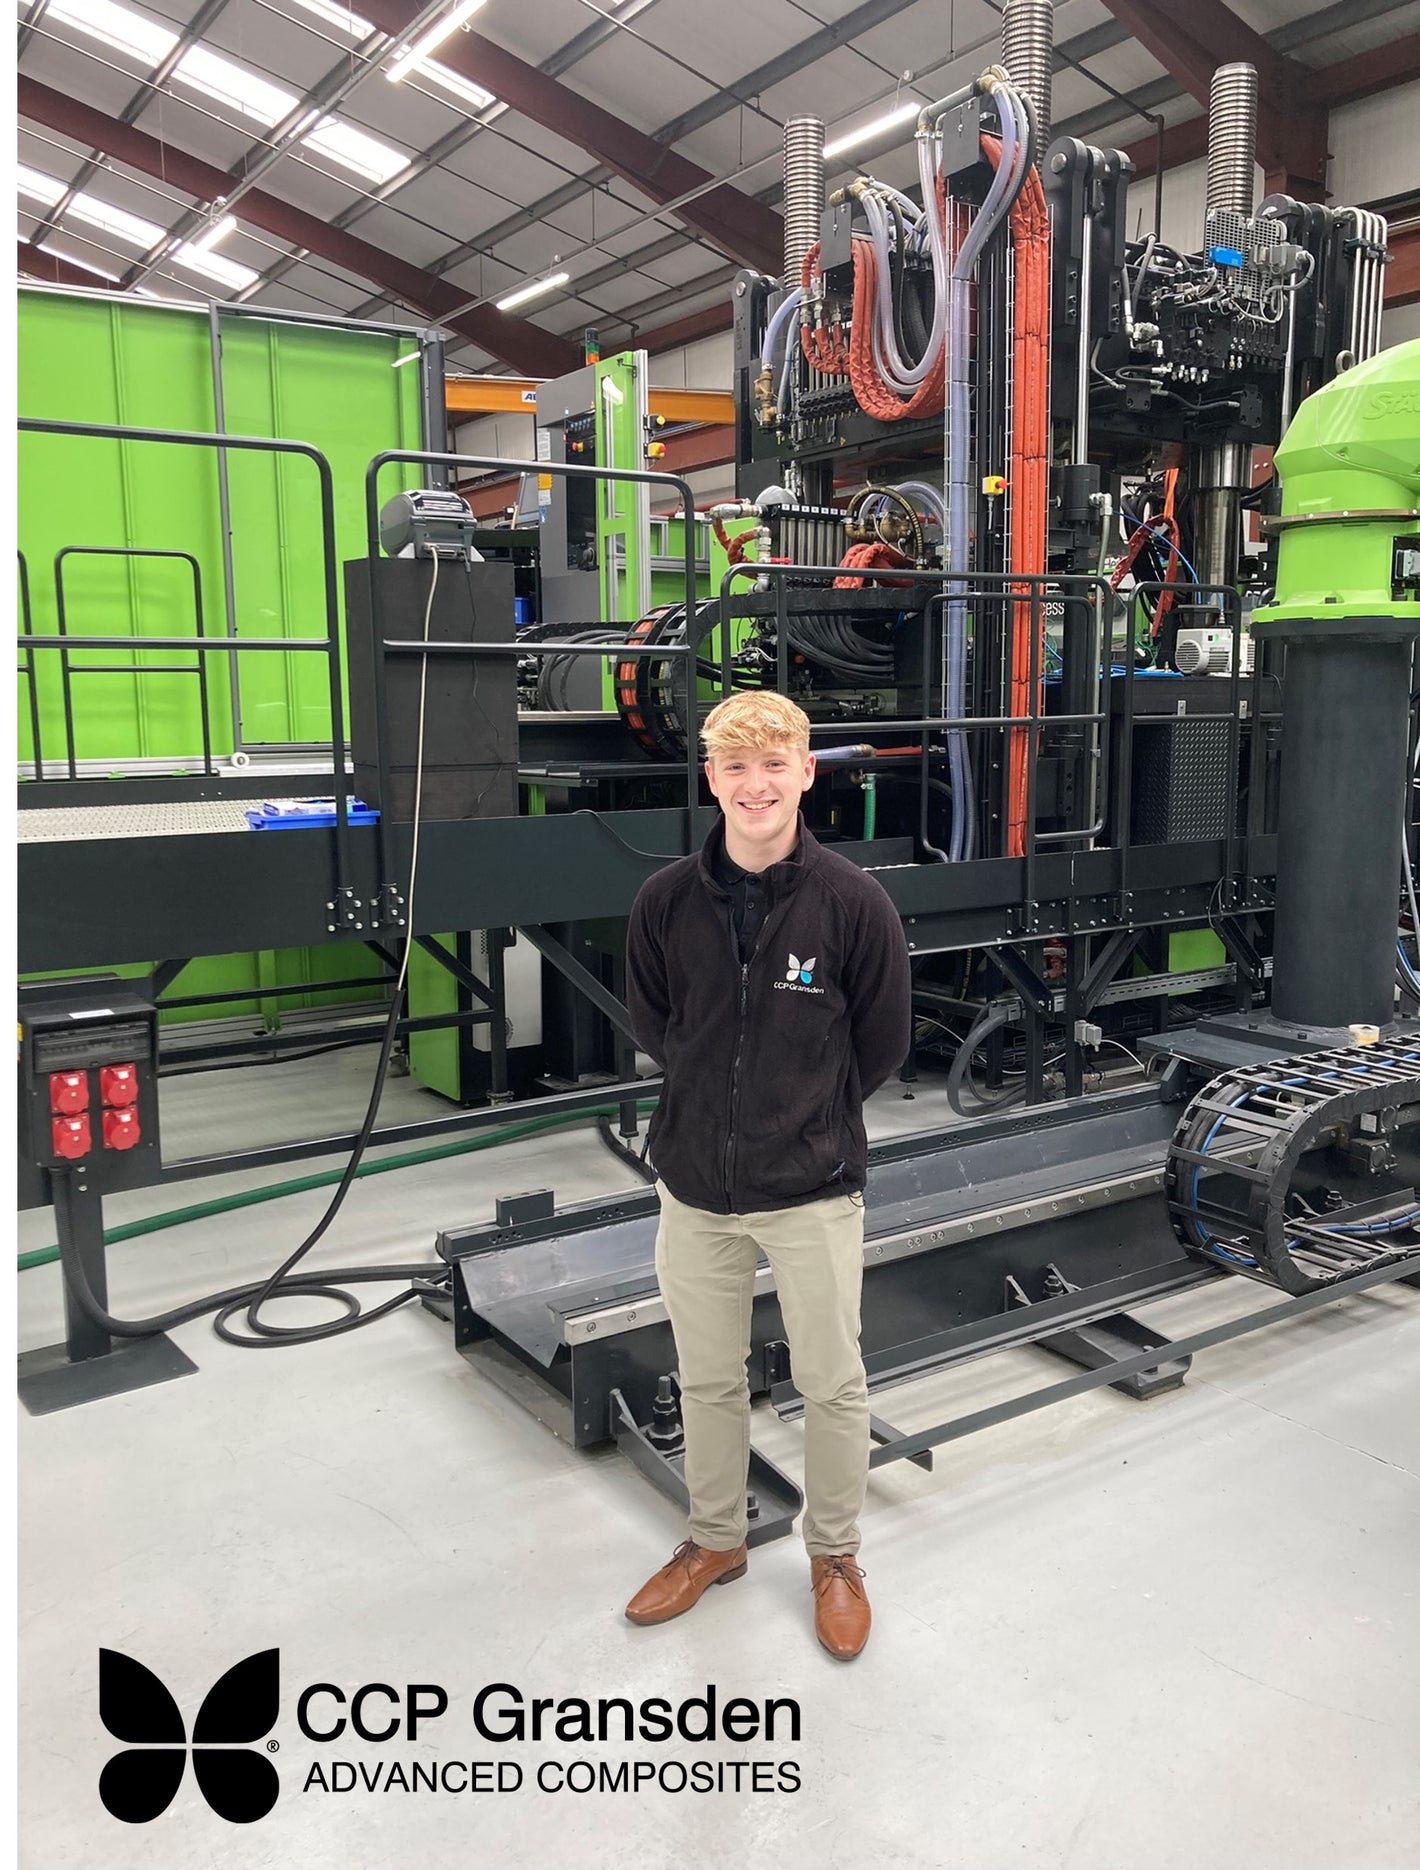 Adam Crilly (one of the placement students at CCP Gransden) pictured in front of the main Engel Cell